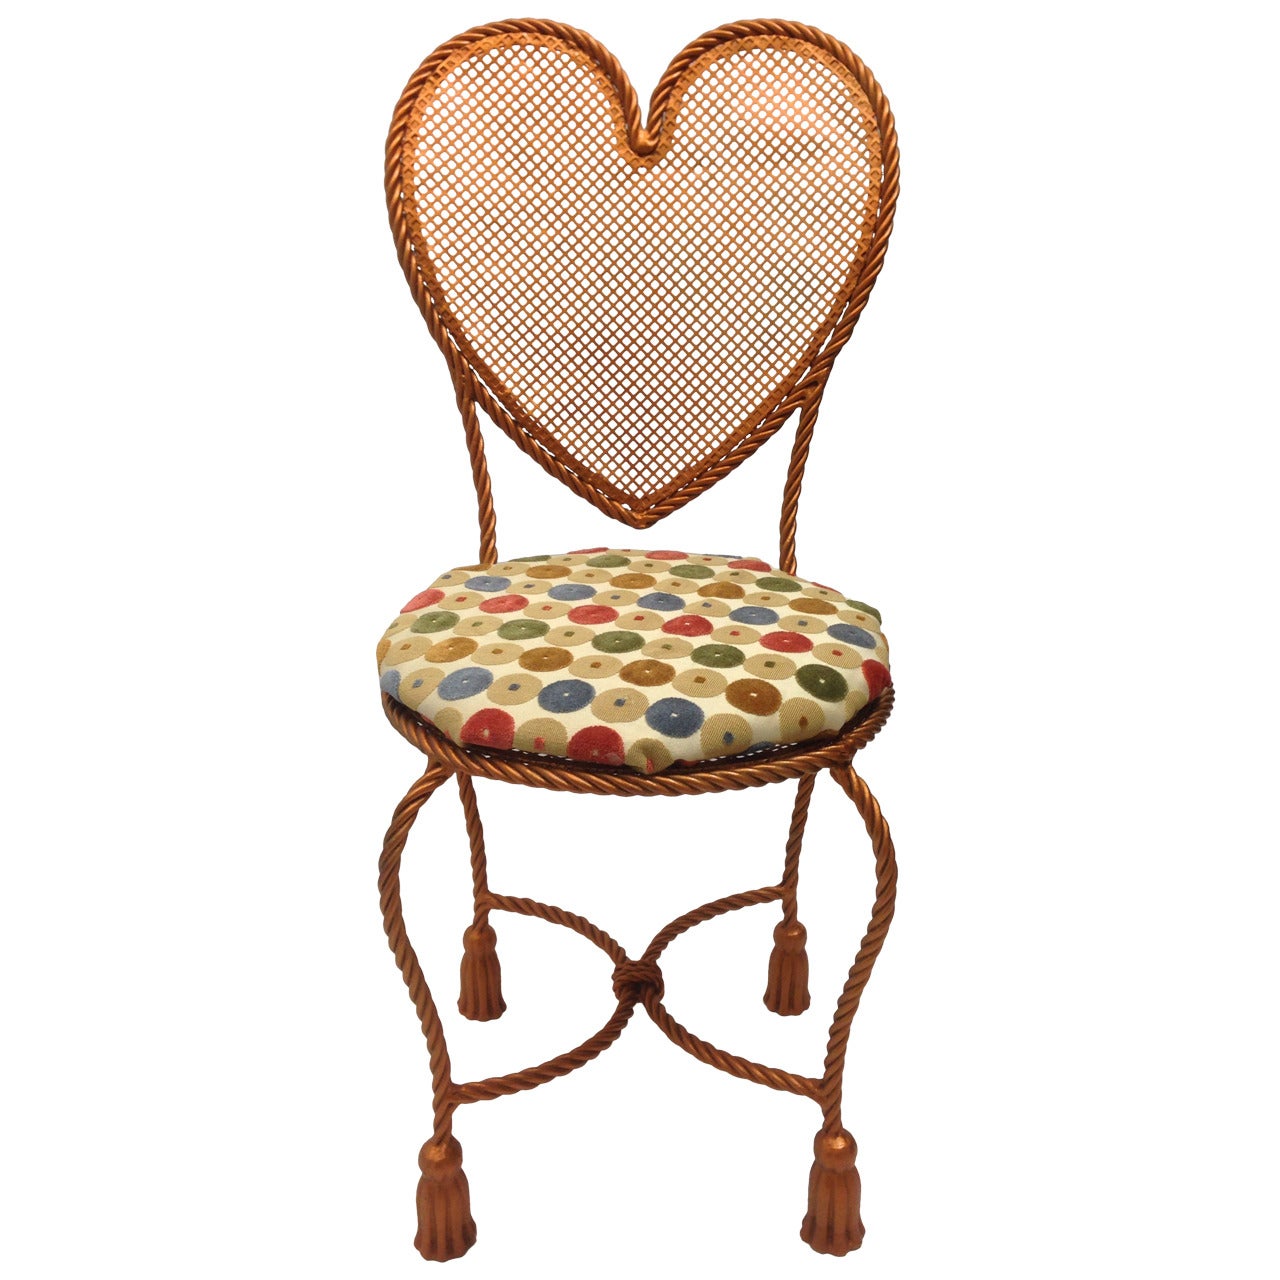 Heart Shaped Rope Chair